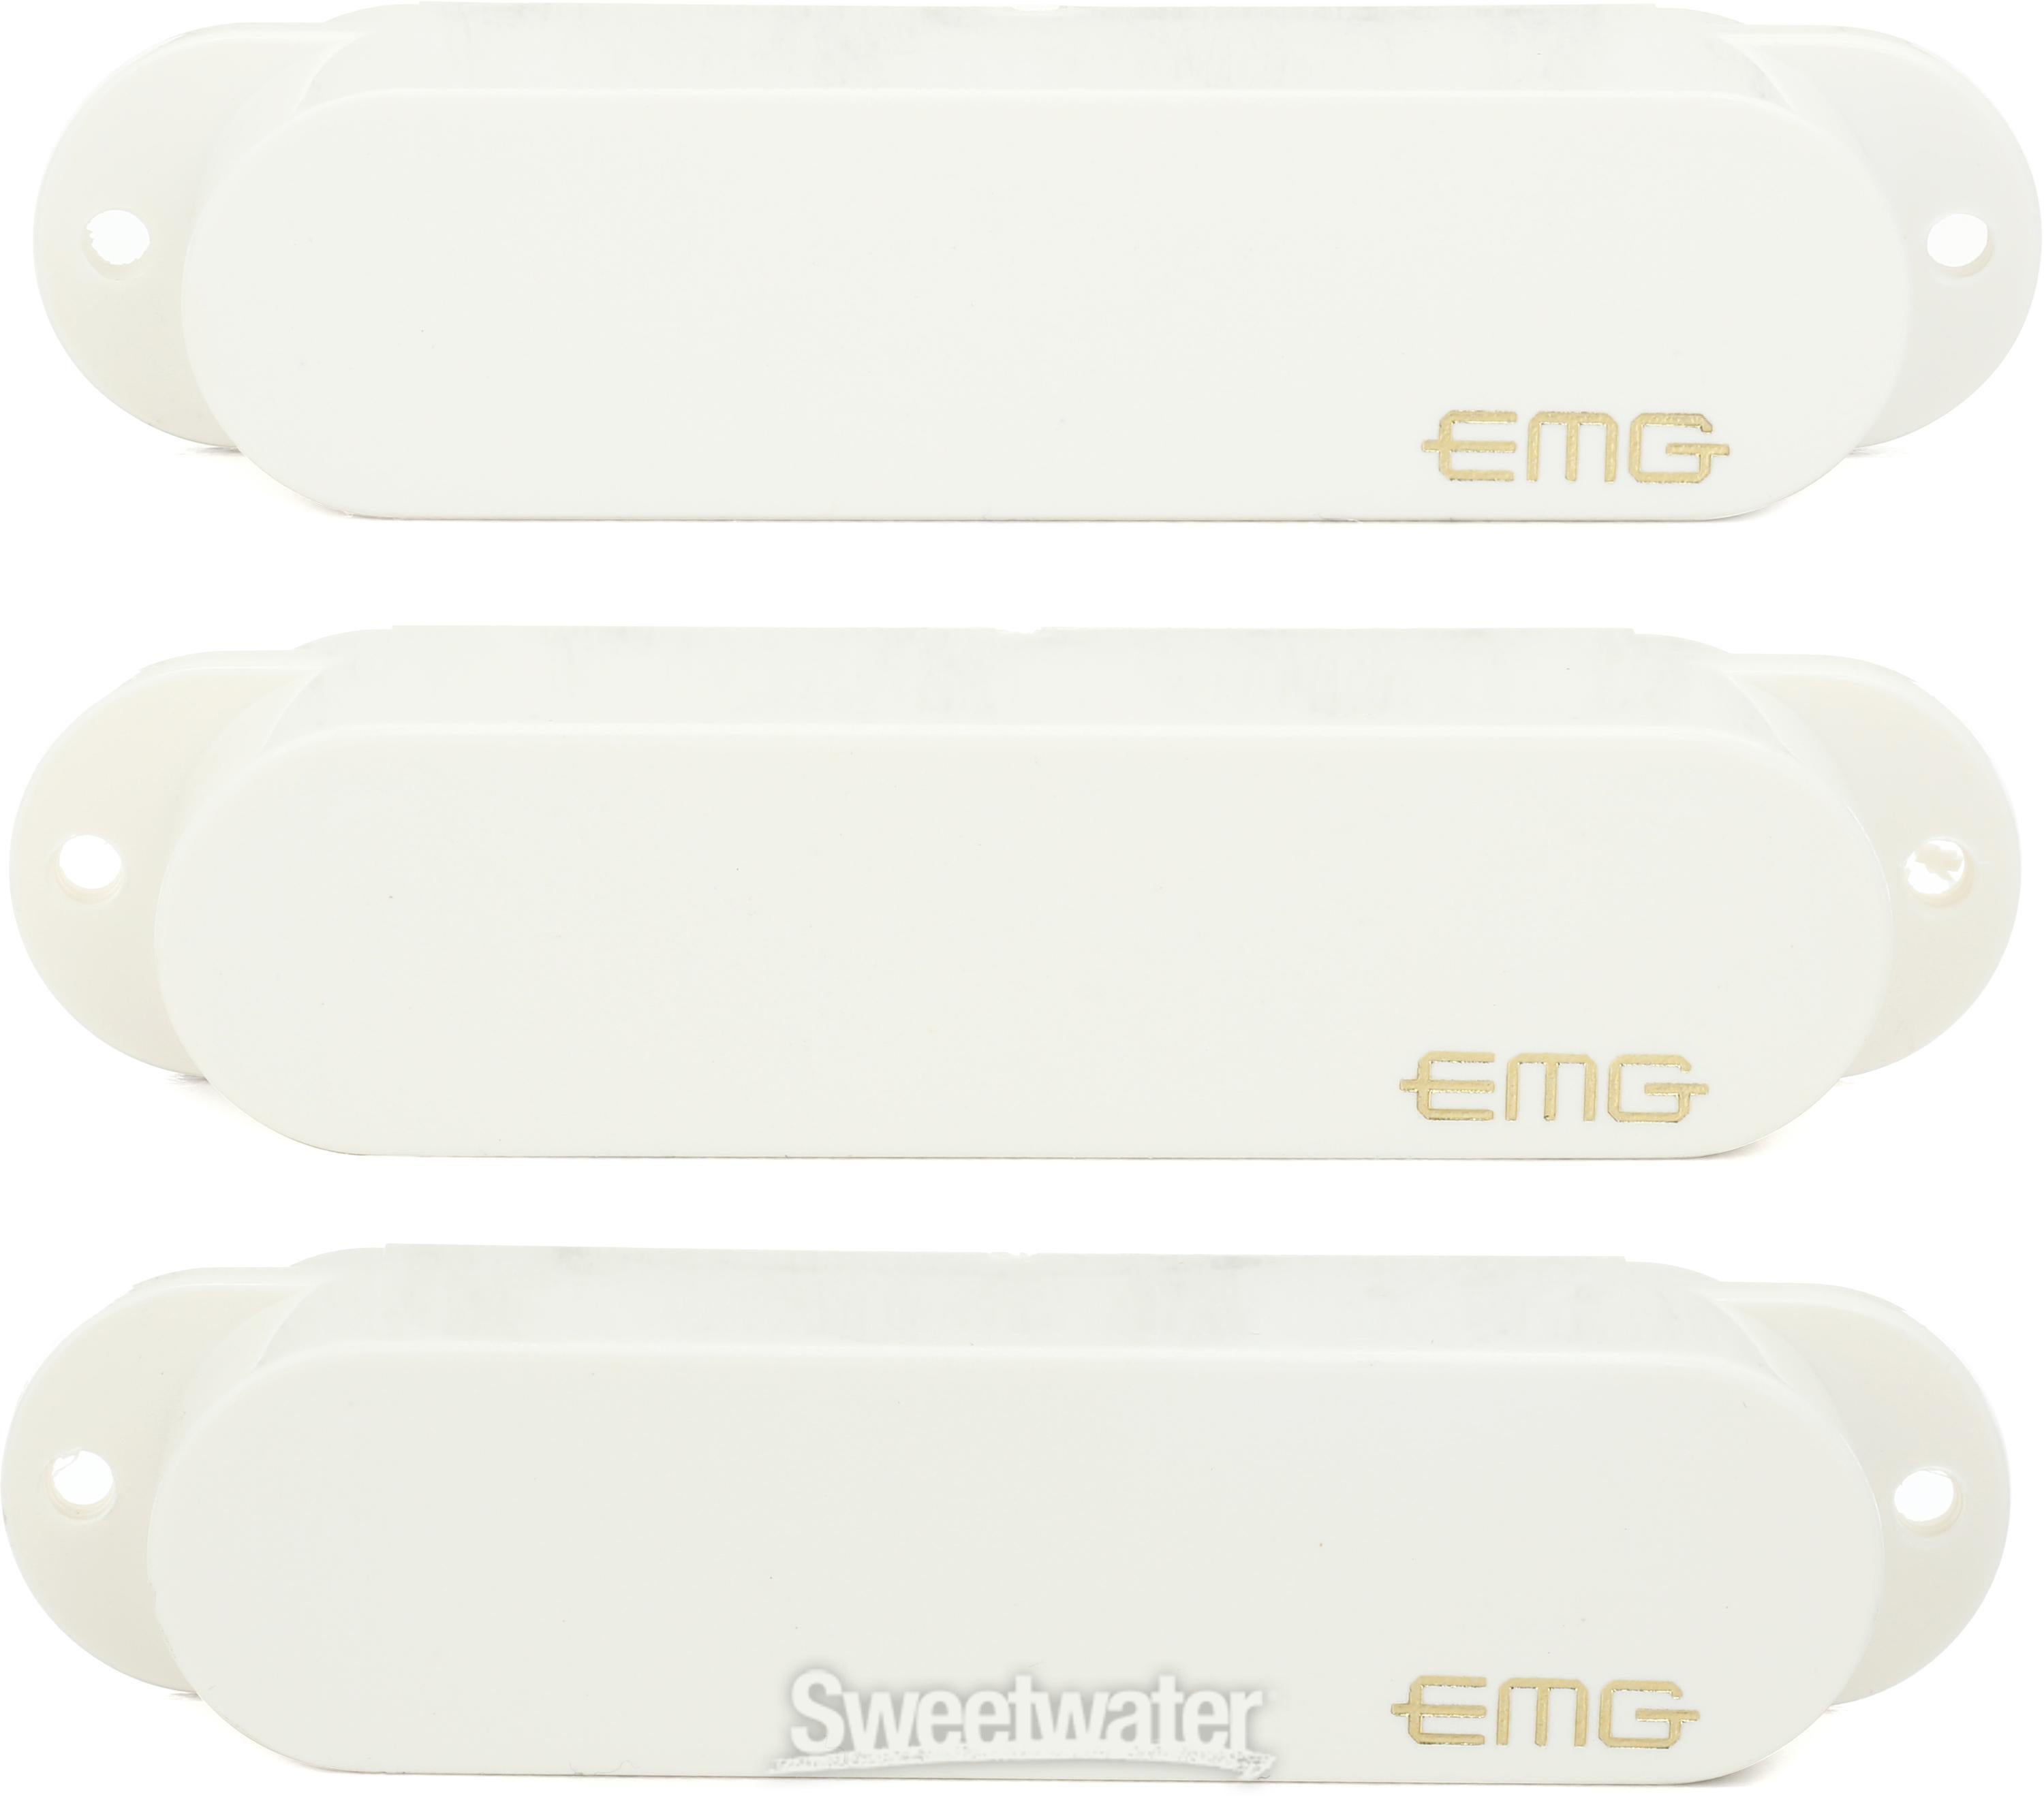 Coil　Pickup　Active　Strat　Alnico　3-piece　EMG　Set　White　SA　Single　Sweetwater